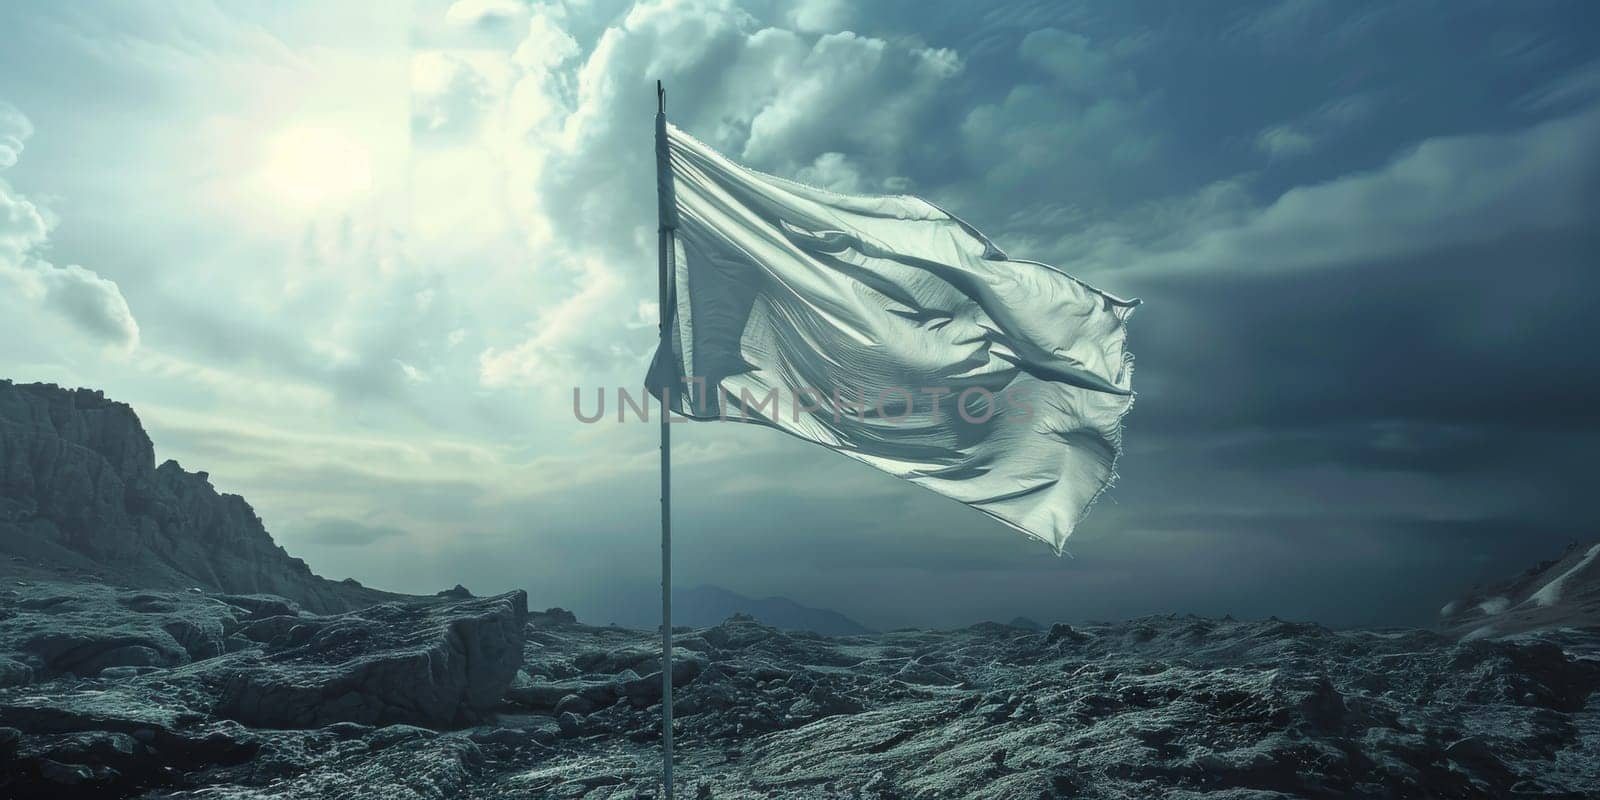 The signaling flag was flying on conquered territory, surrender and give up concept by Kadula